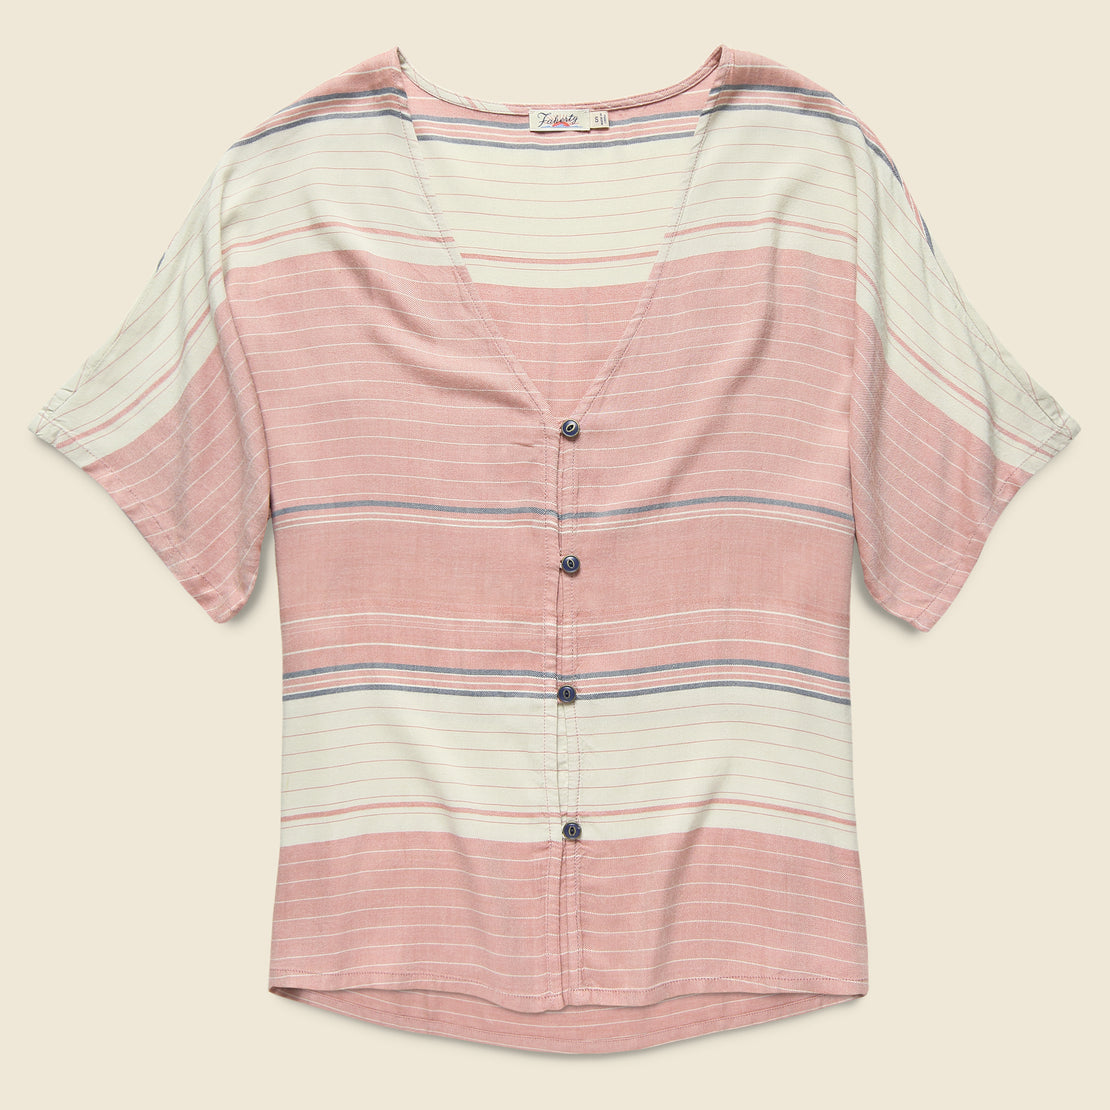 Faherty Analeigh Top - Rosewood Stripe